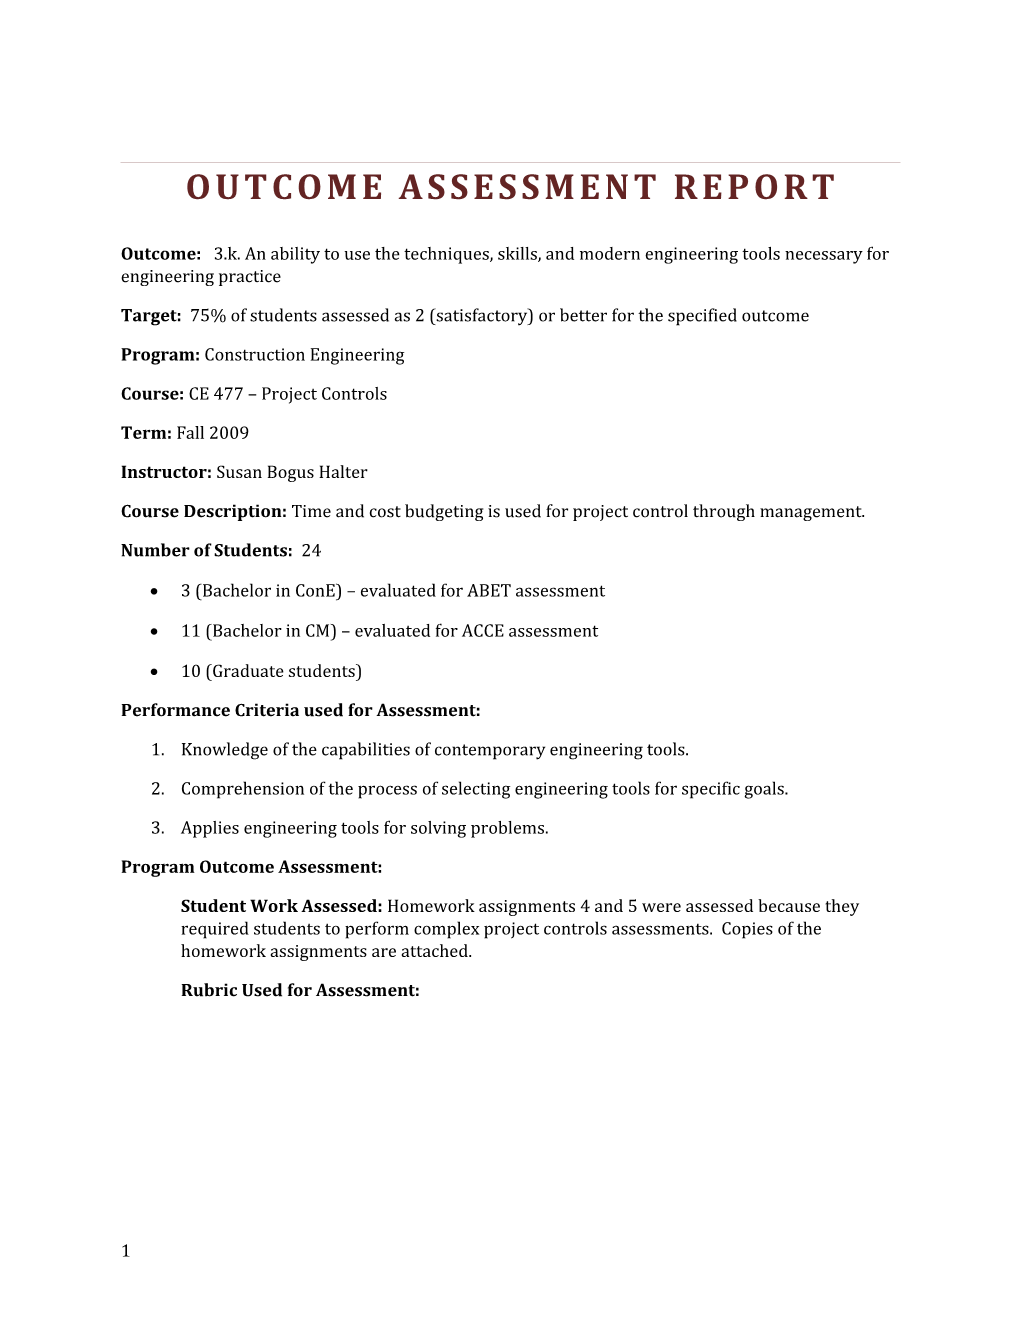 Target: 75% of Students Assessed As 2 (Satisfactory) Or Better for the Specified Outcome SBH2